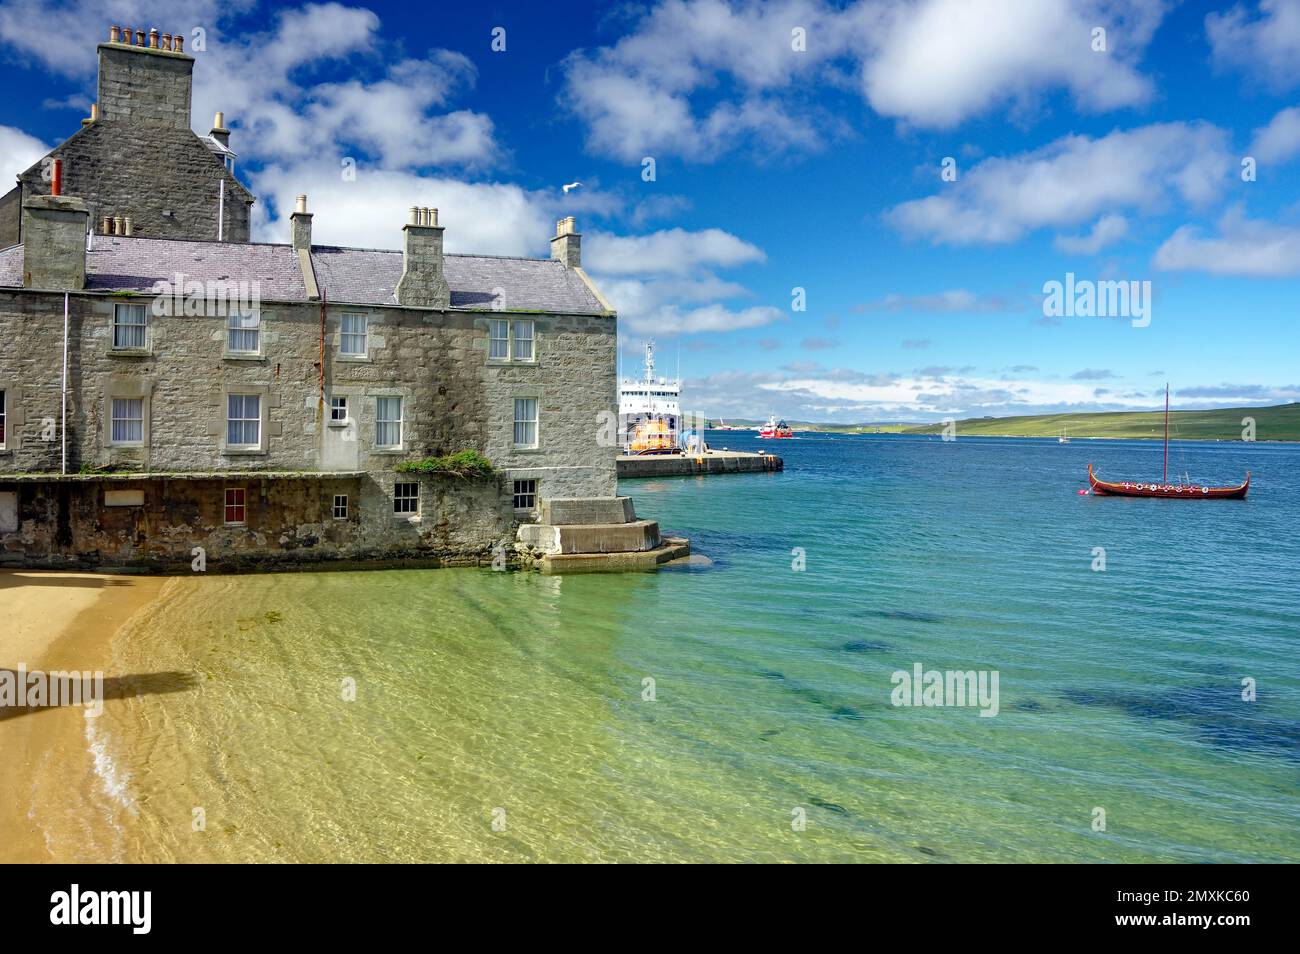 Quiet bay with crystal clear water, harbour, stone house and Viking ship Lerwick, Shetland Islands, Scotland, United Kingdom, Europe Stock Photo